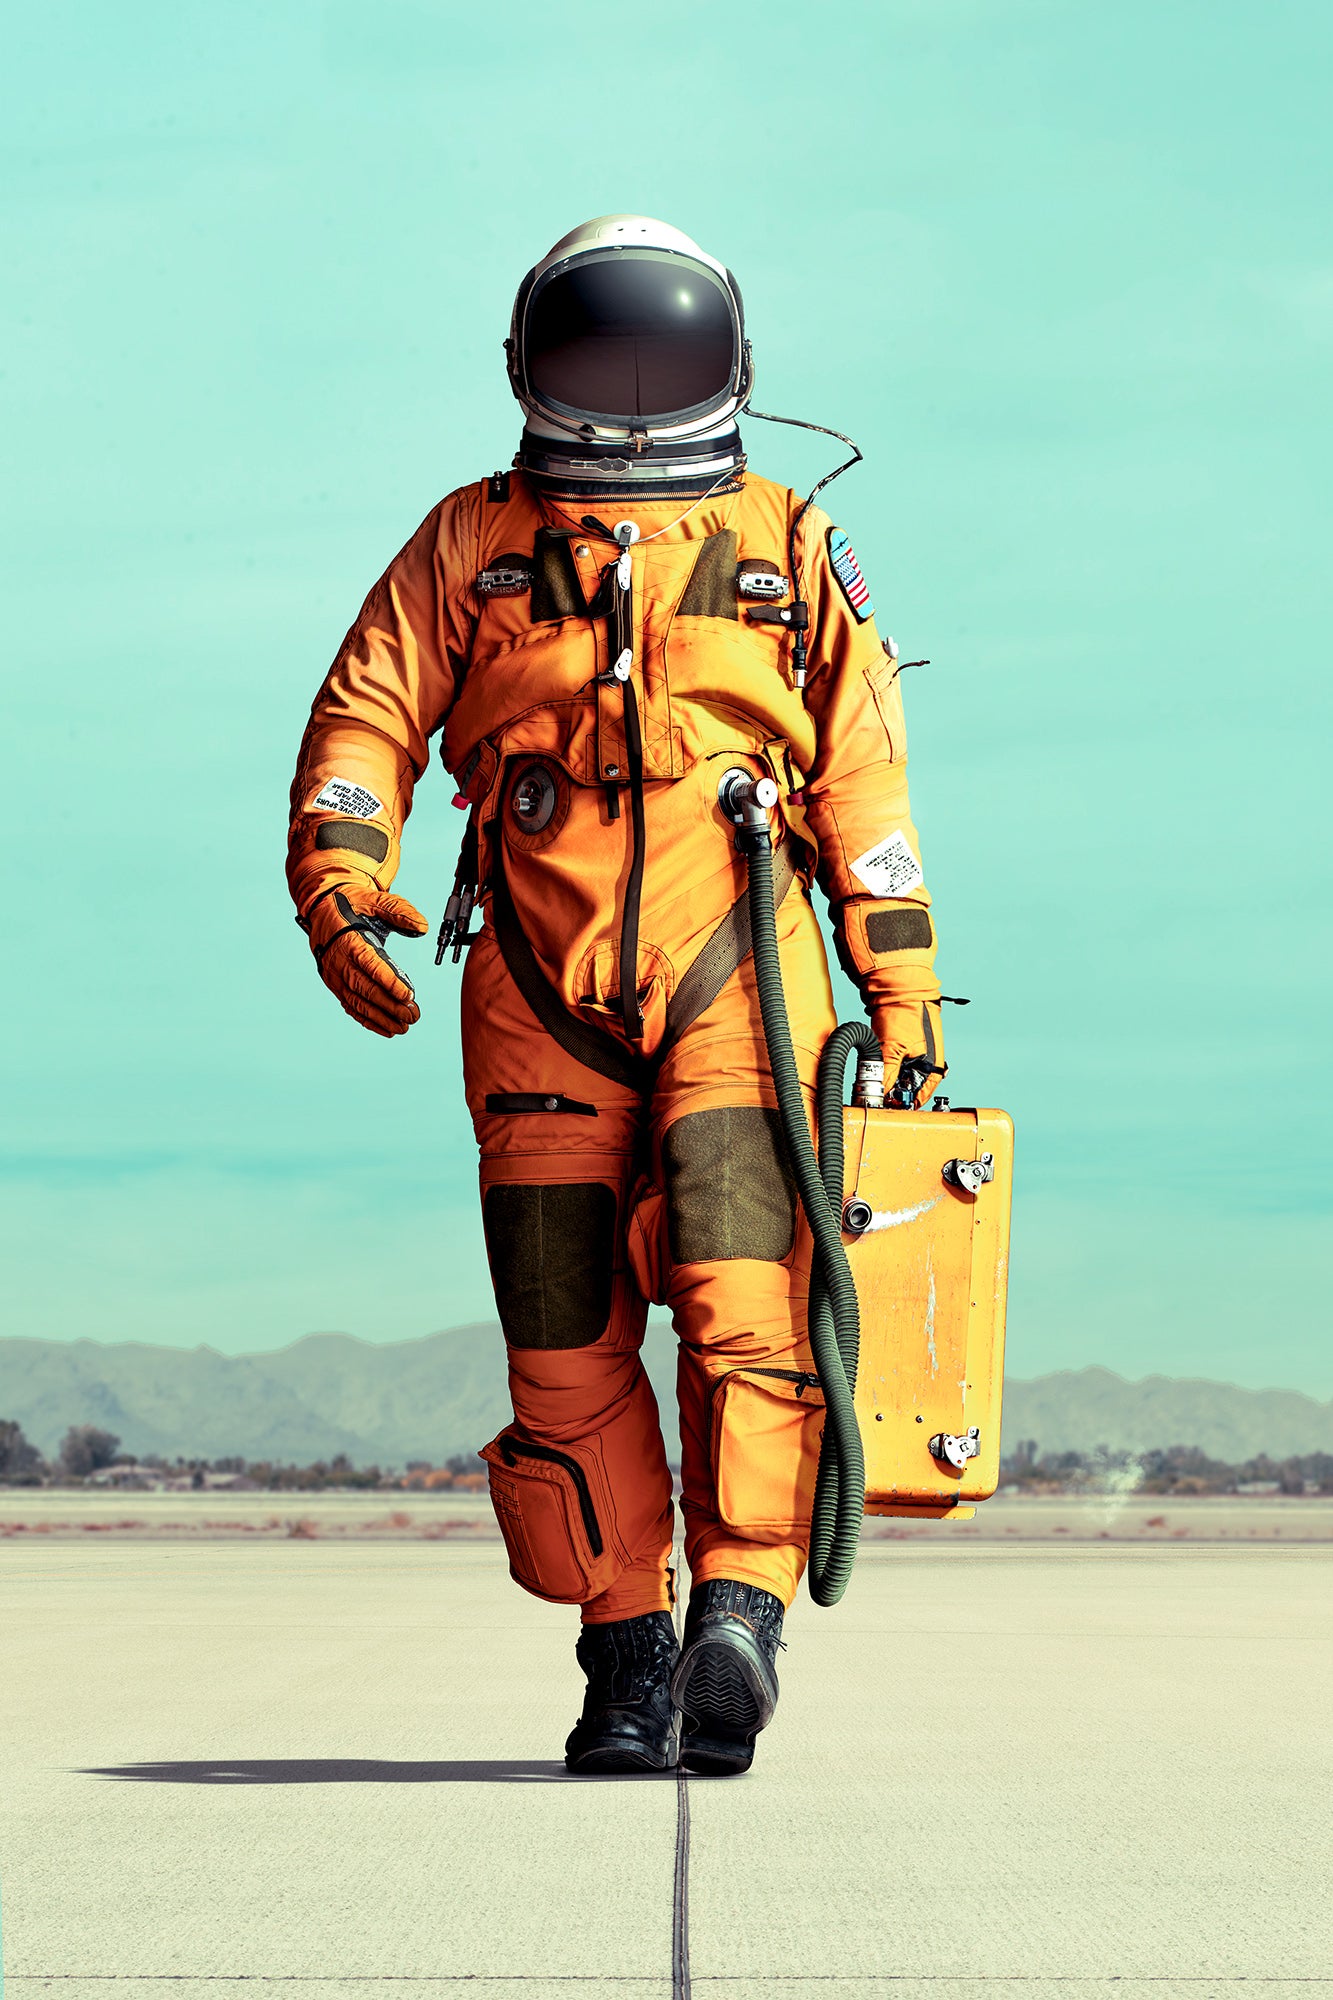 A U2 Dragon Lady spy plane pilot photographed by Commercial Photographer Blair Bunting. The image is part of the series "Photoshoot at the Edge of Space," in which Bunting did a photoshoot above 70,000 feet while in a spacesuit.